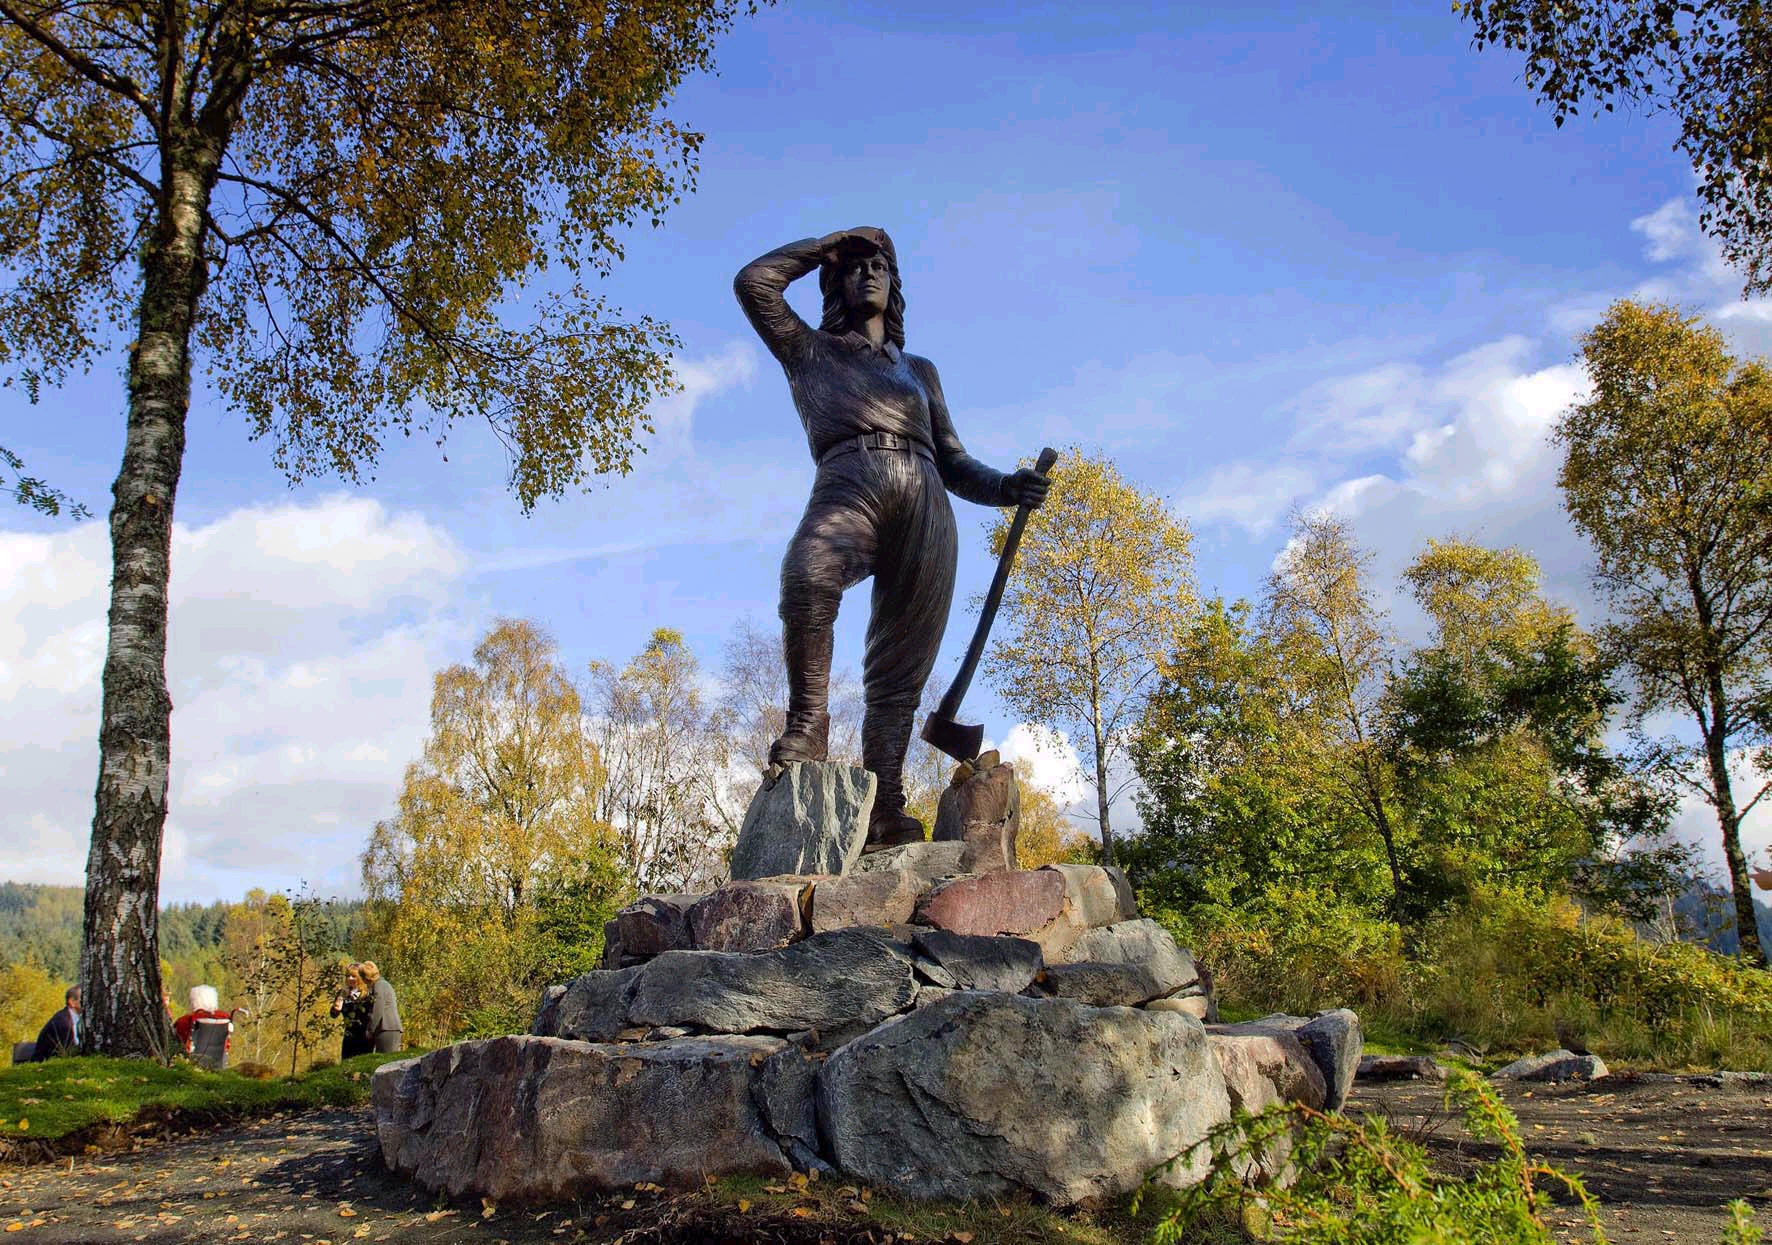 The women's timbers corps bronze statue in autumn